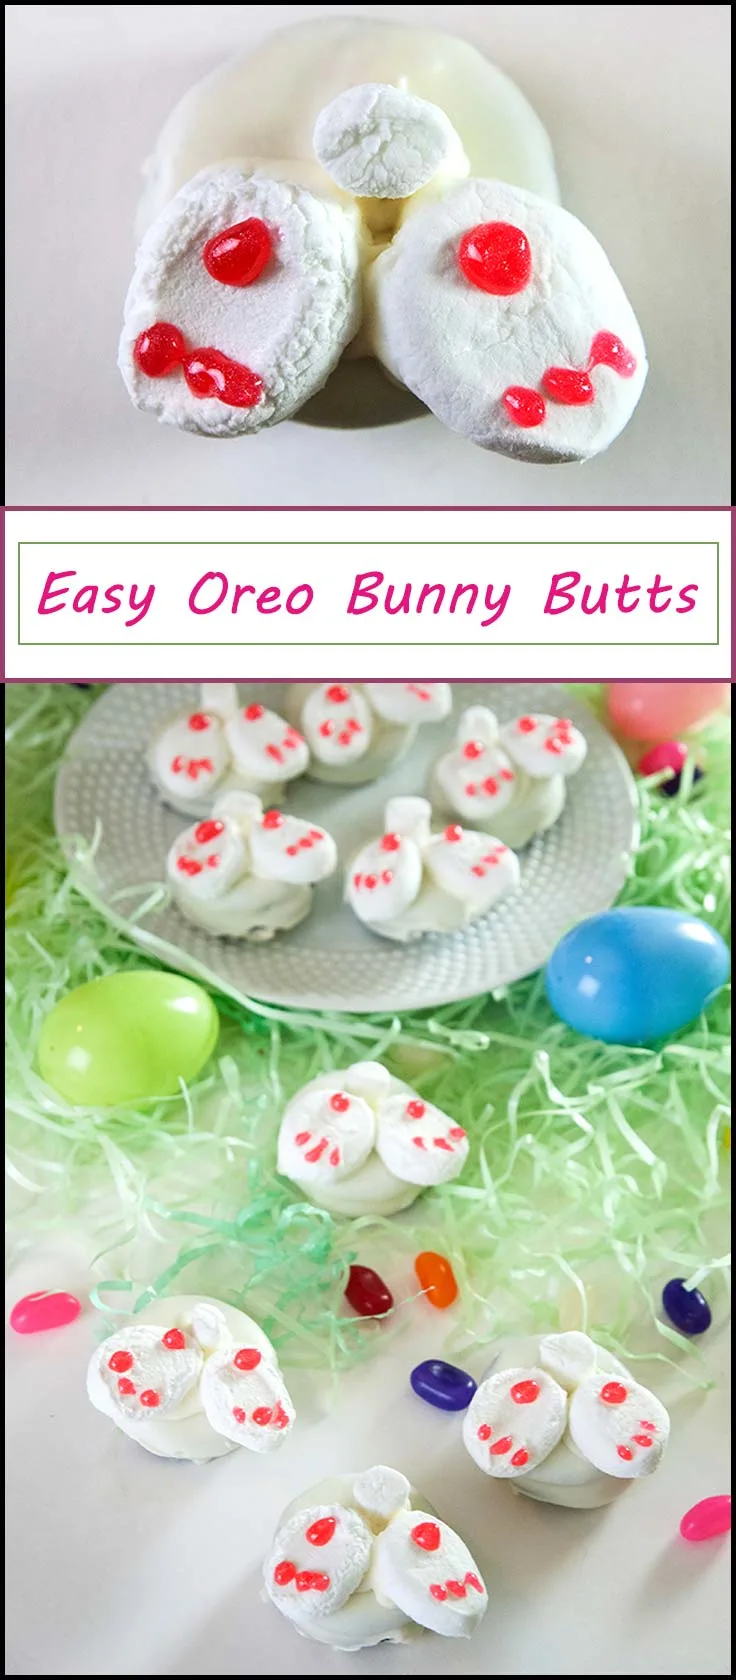 Easy Oreo Bunny Butts for Easter dessert or an Easter treat. Perfect easy Easter cookies from www.seasonedsprinkles.com